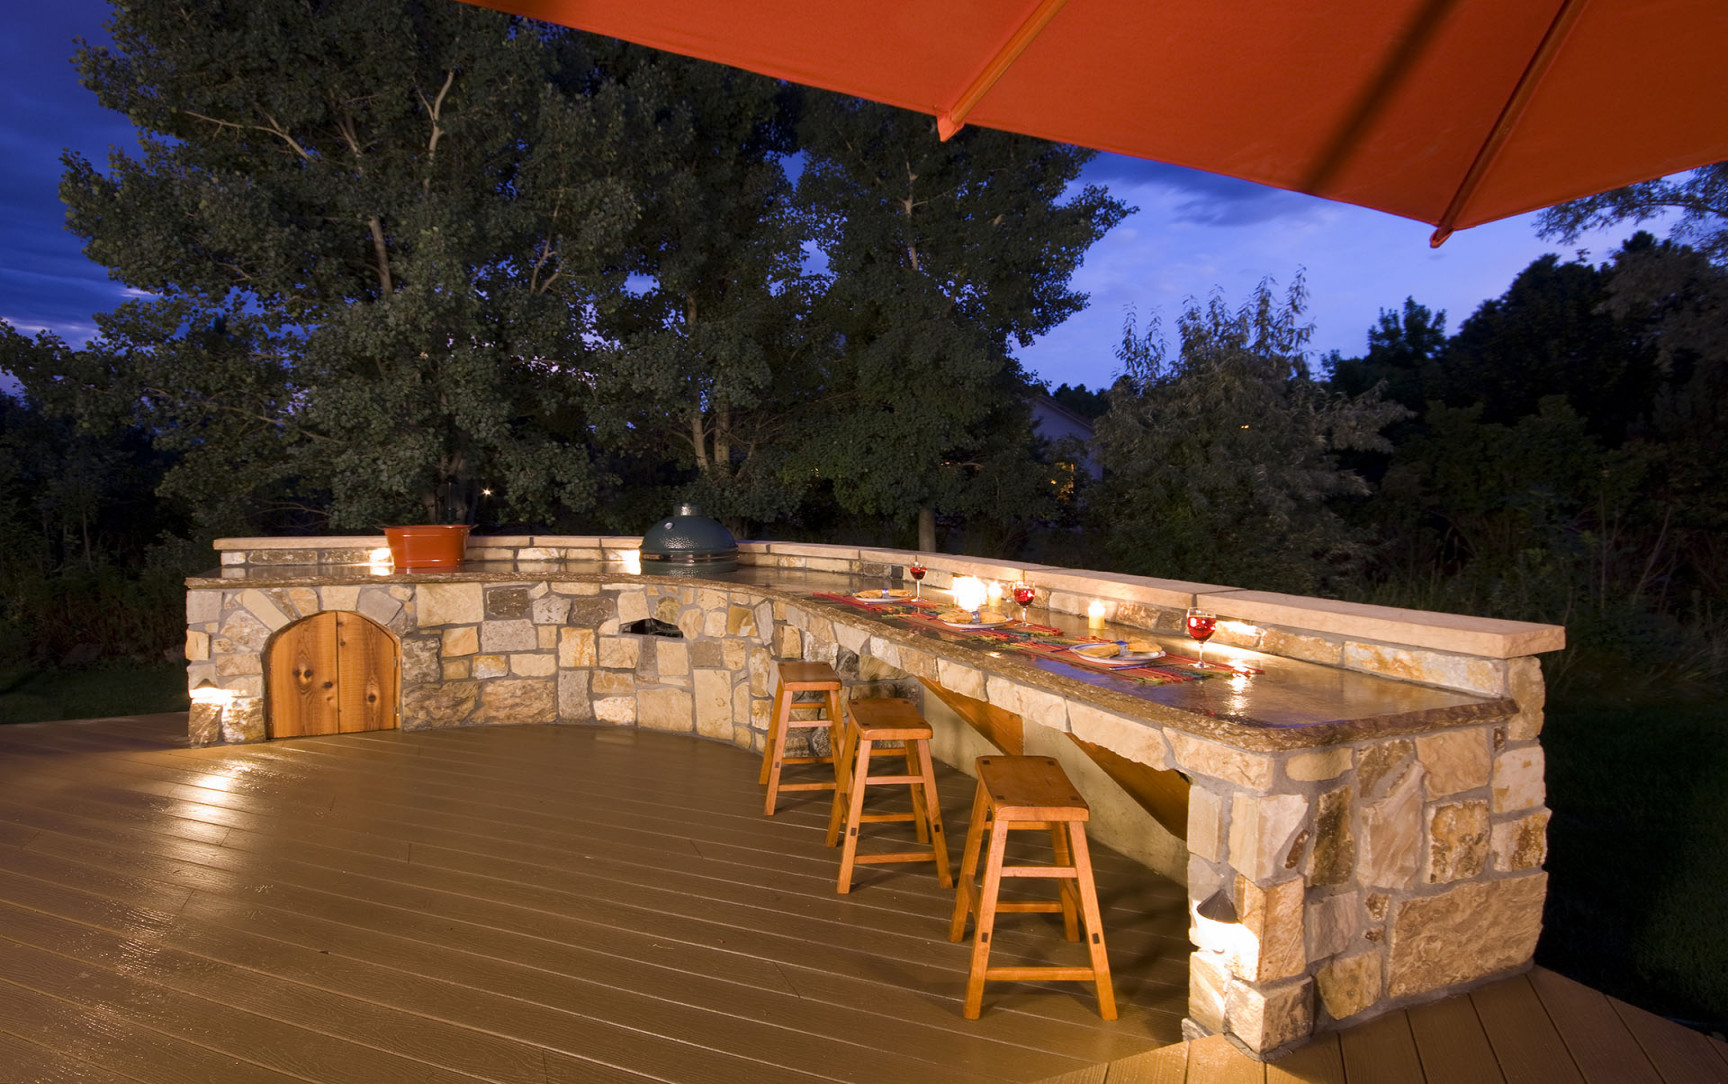 Outdoor Kitchen Lighting - Home Decorating Colour Ideas